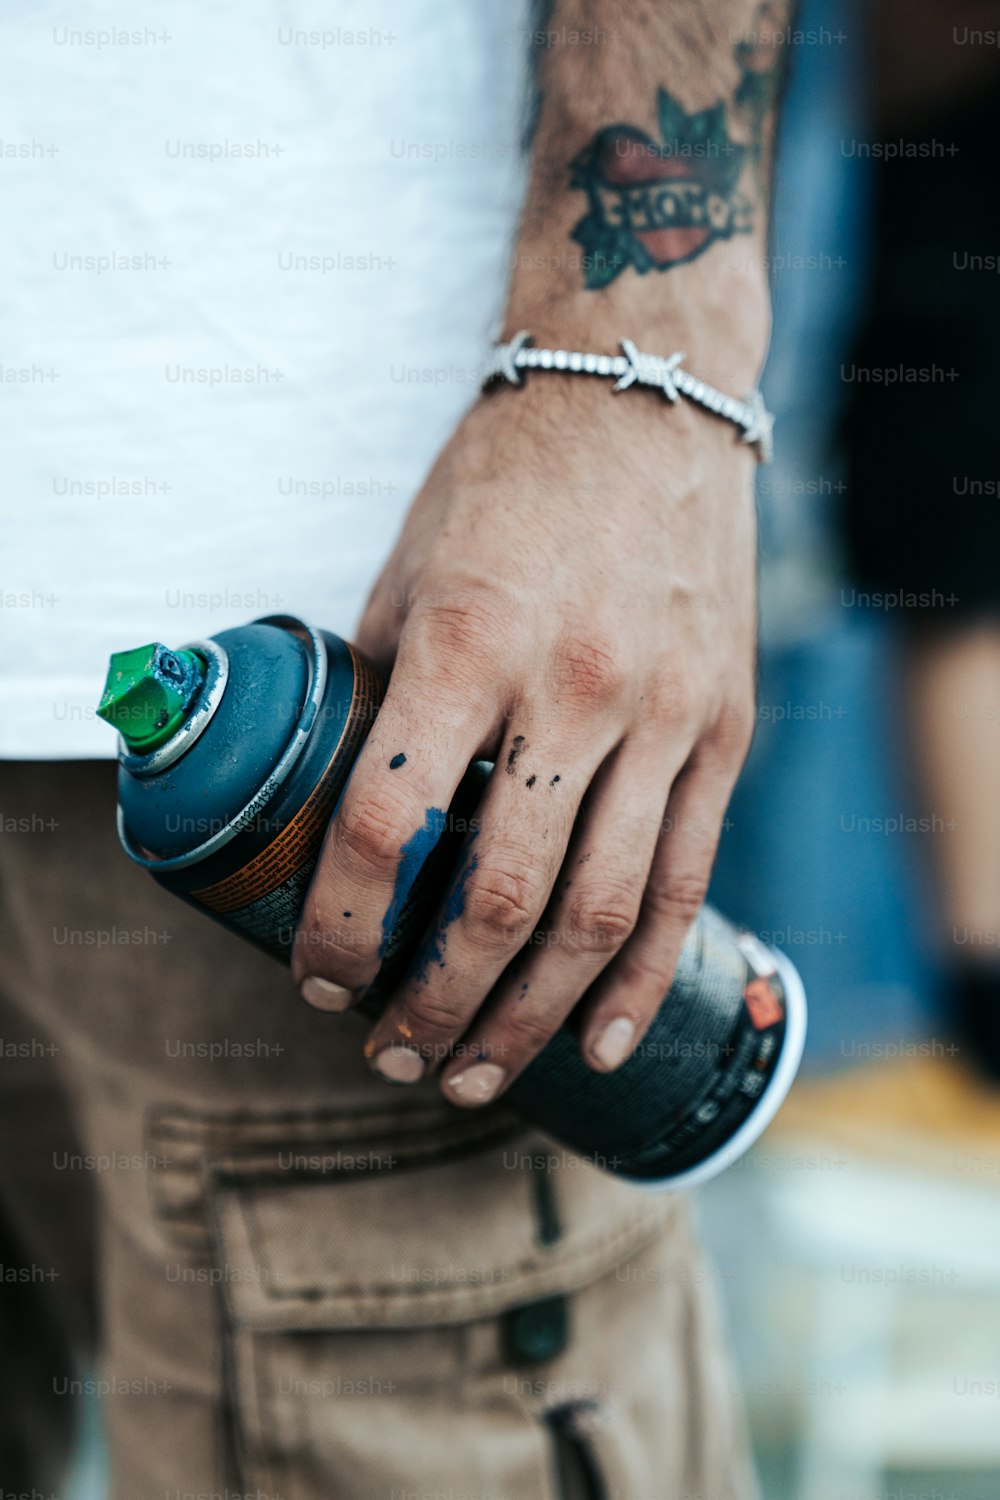 a man with a tattoo on his arm holding a bottle